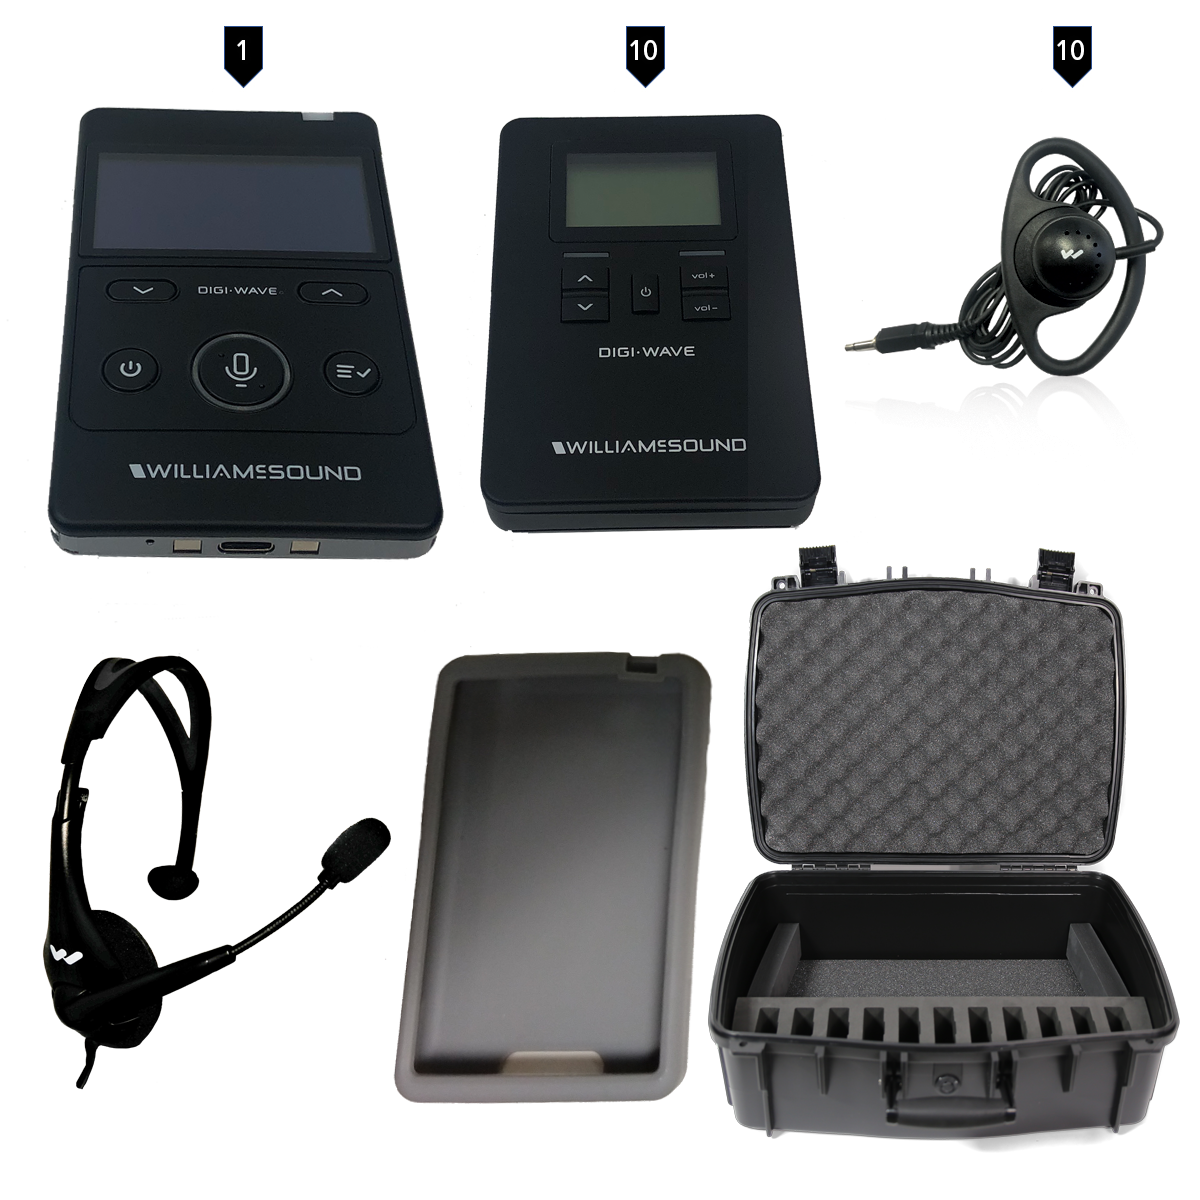 Williams Sound Digi-Wave 400 Series Tour Guide System - Full Kit for 10 listeners and 1 Guide